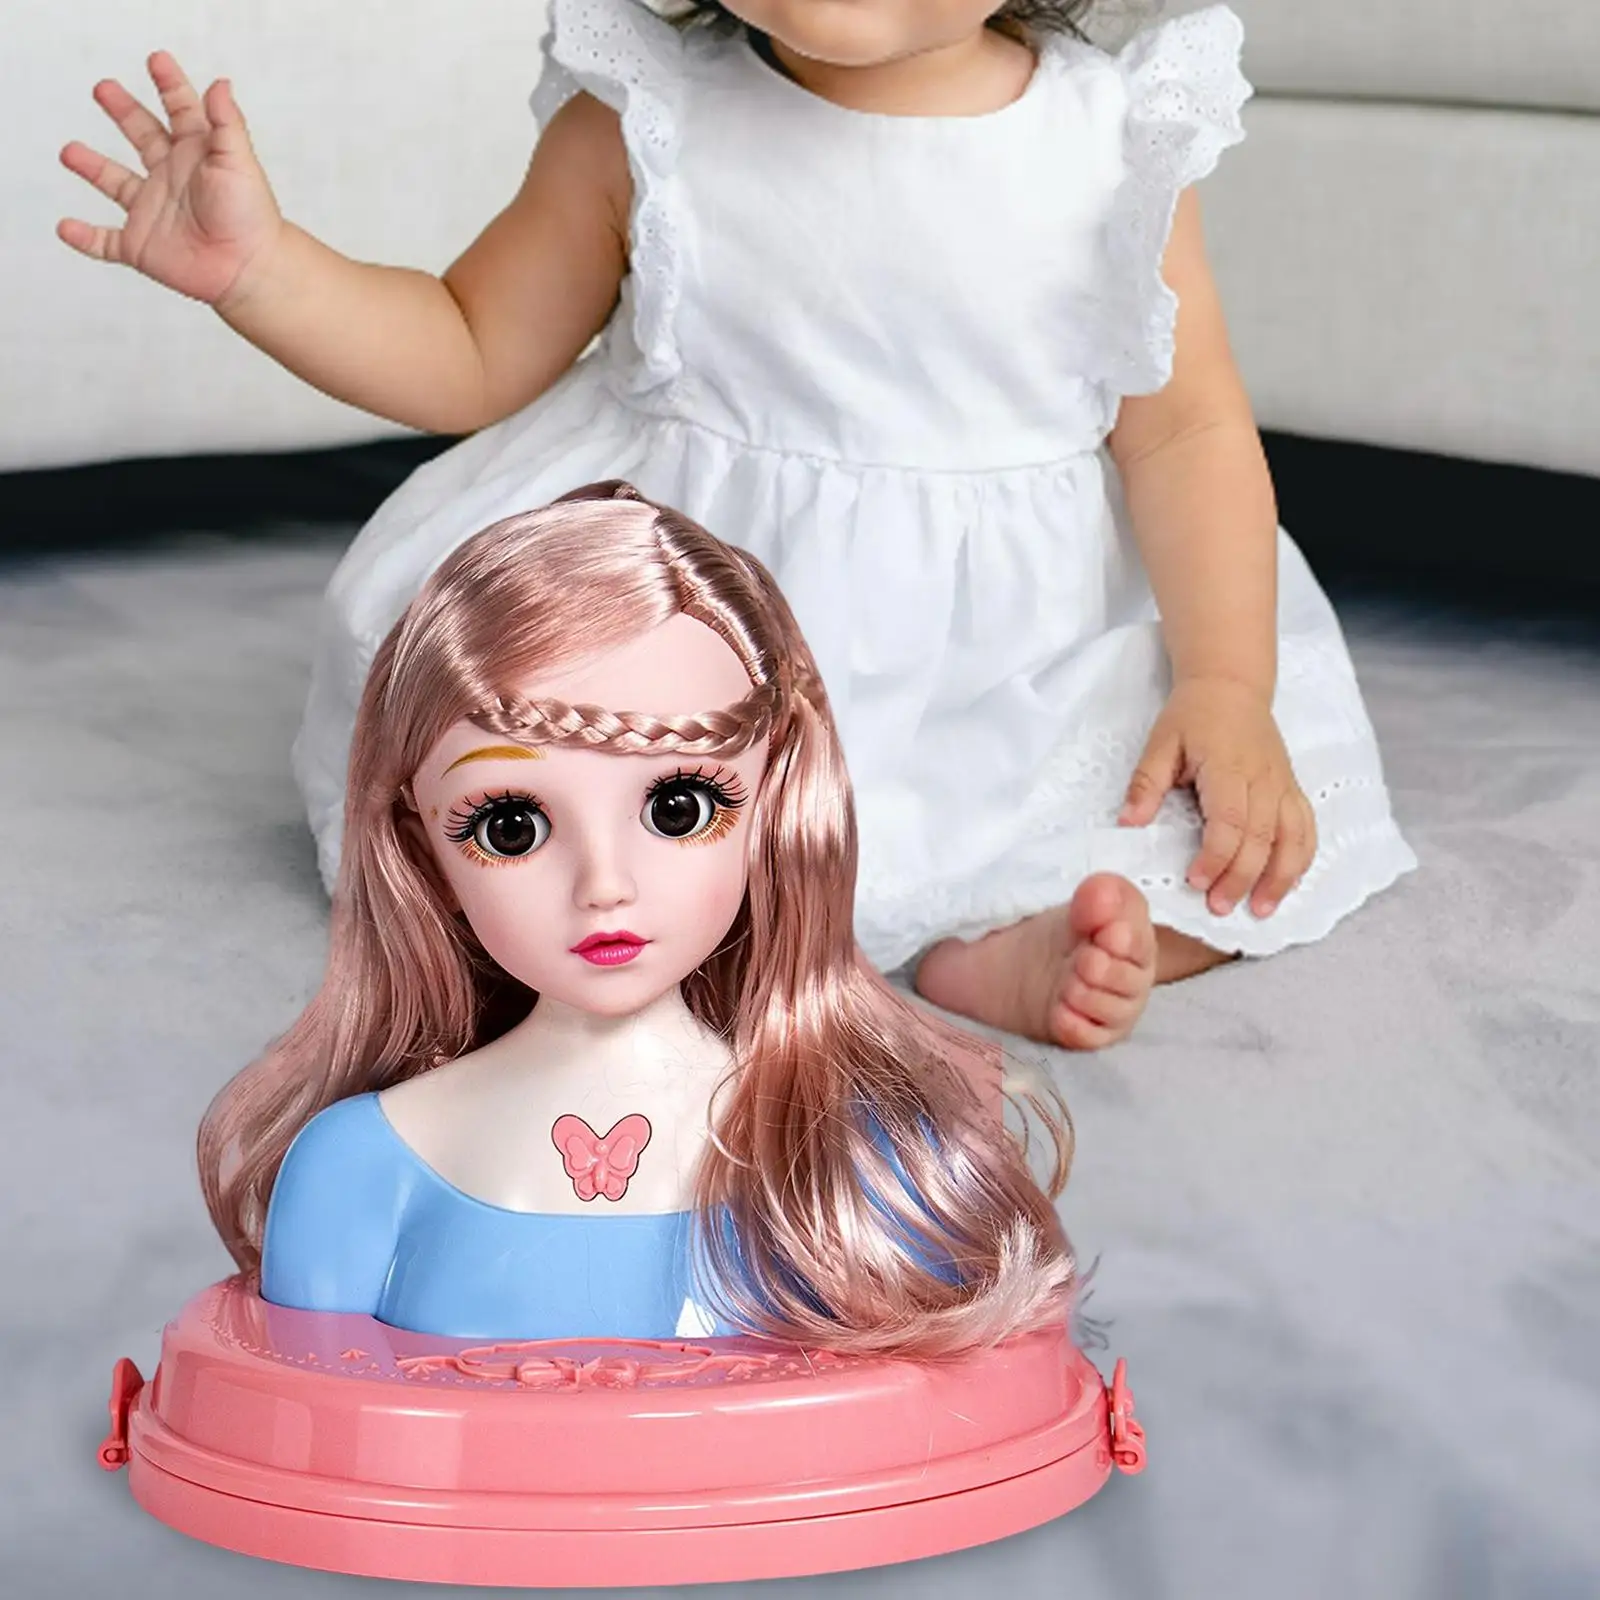 Fashion Doll Styling Head Toy Movable Eyelids Doll Hair Styling Toy for Girls Kids Gifts